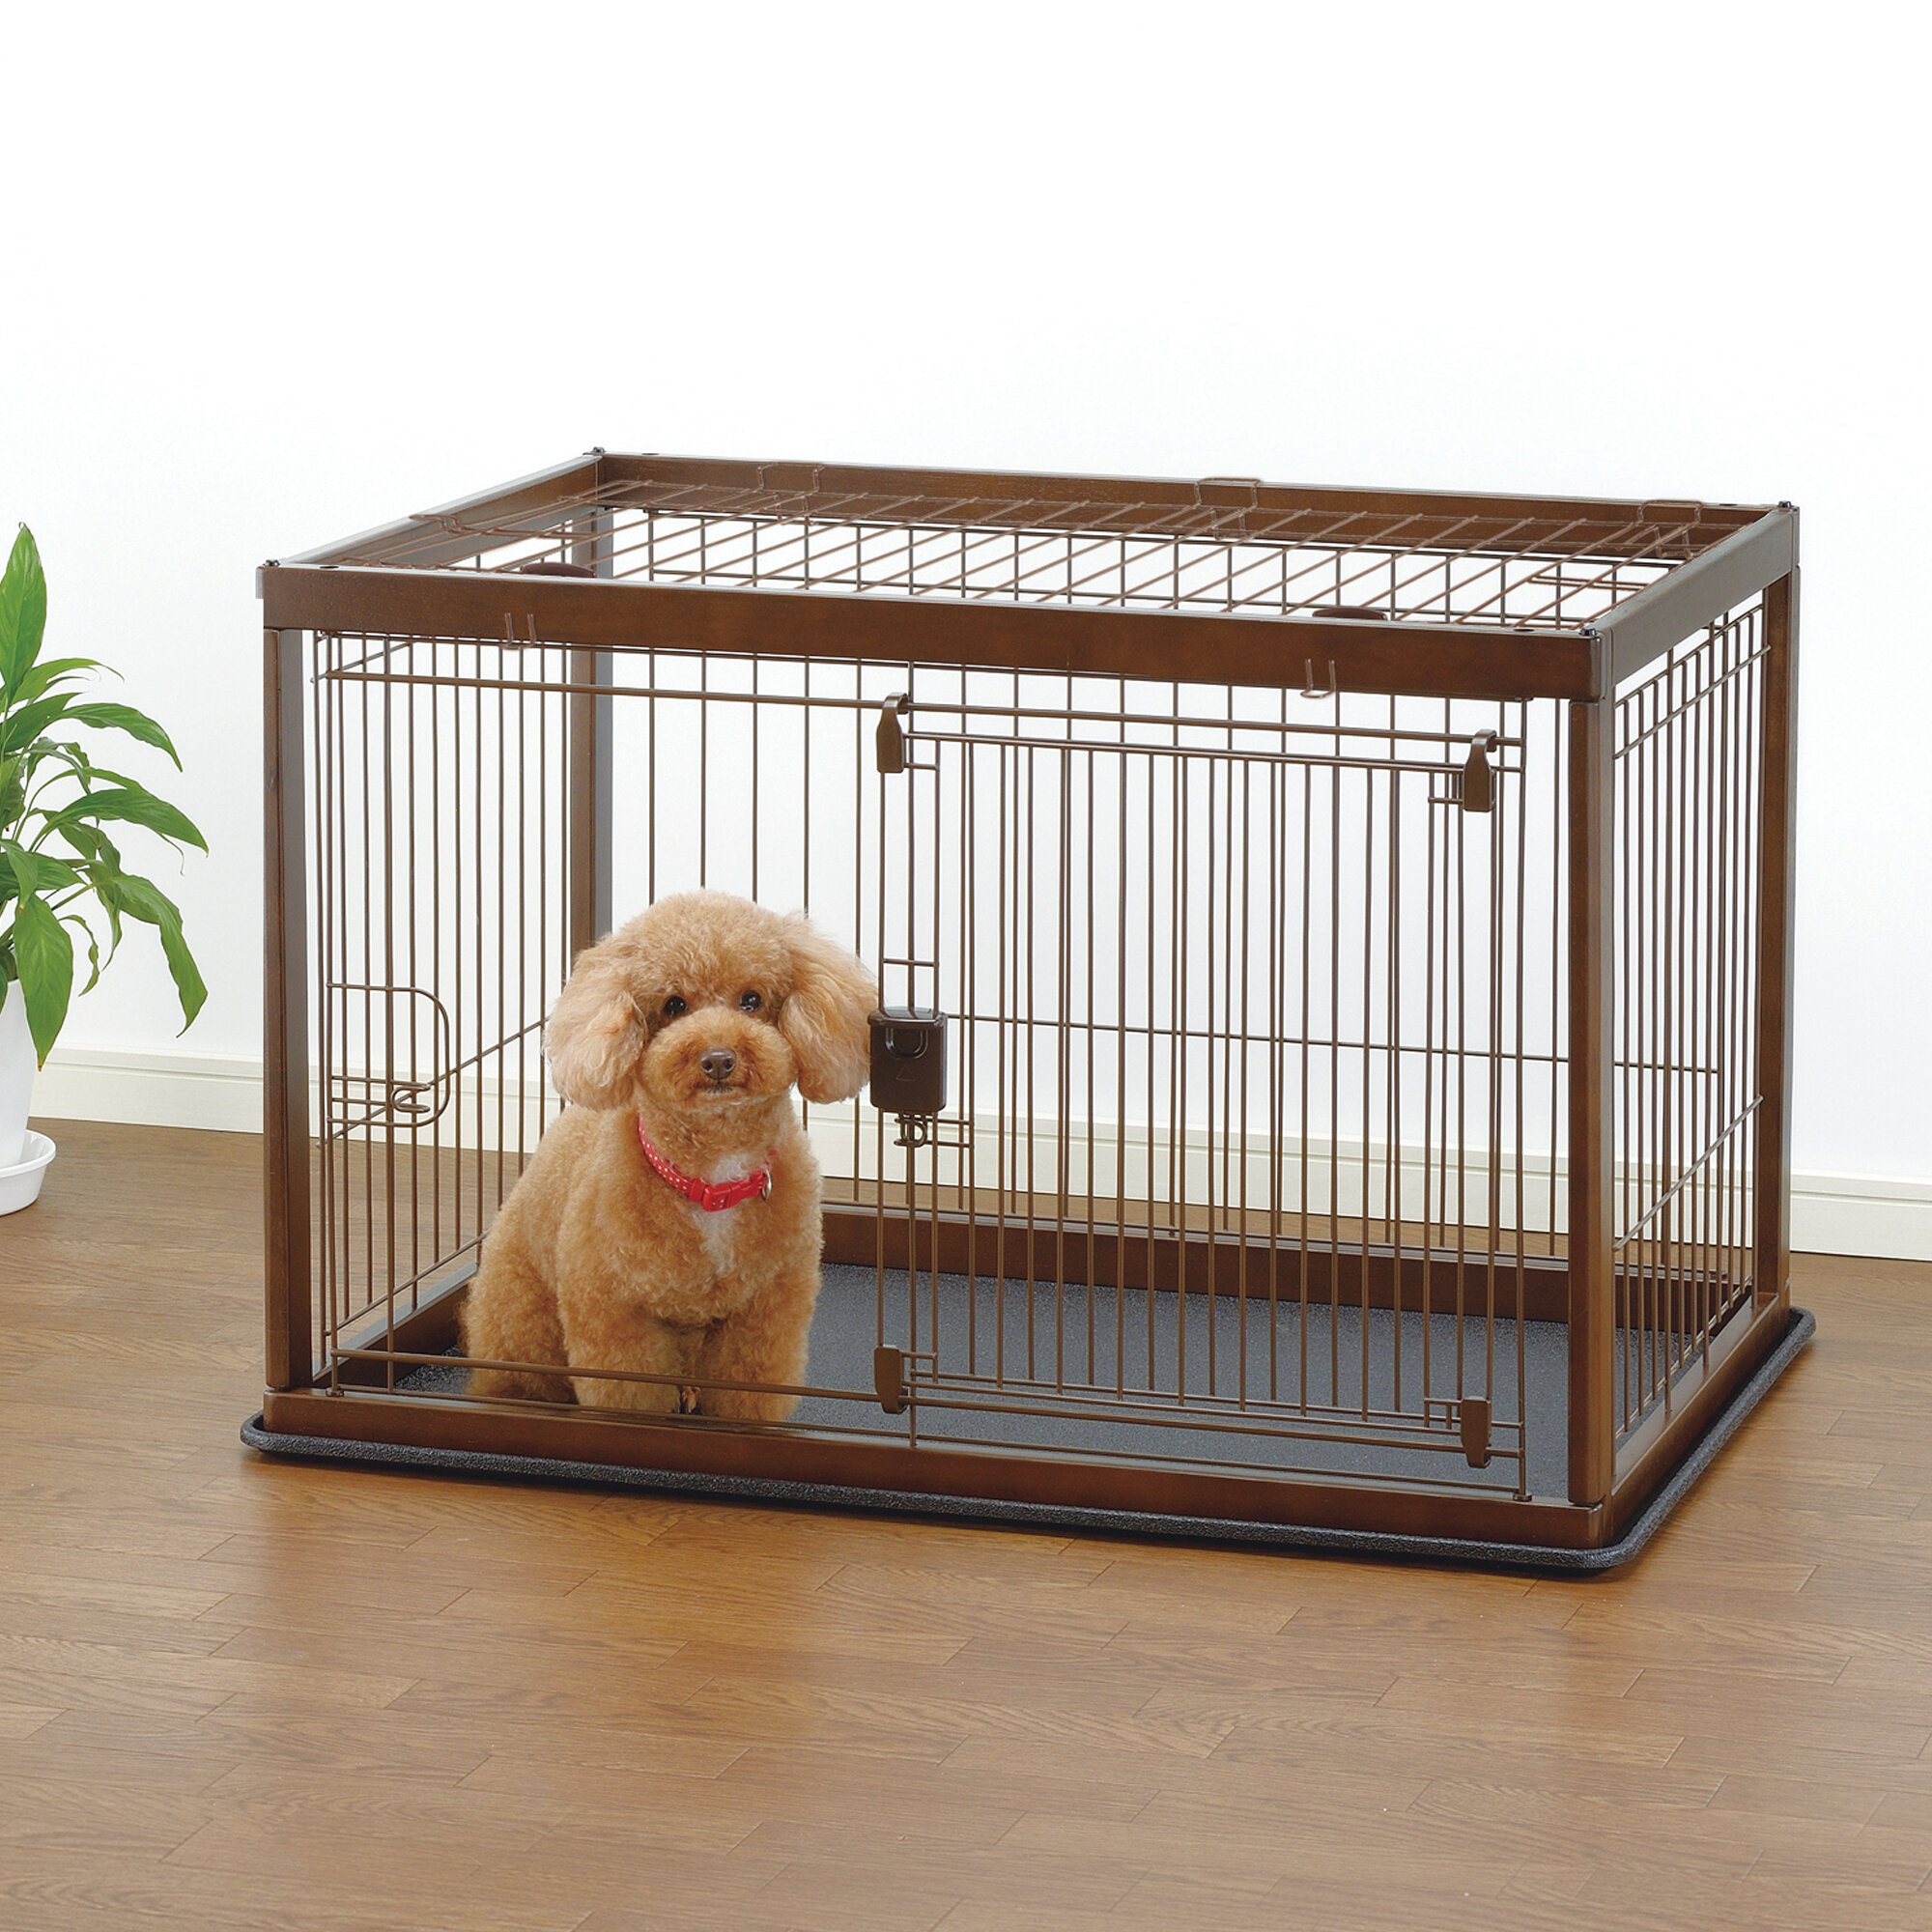 wooden dog crates